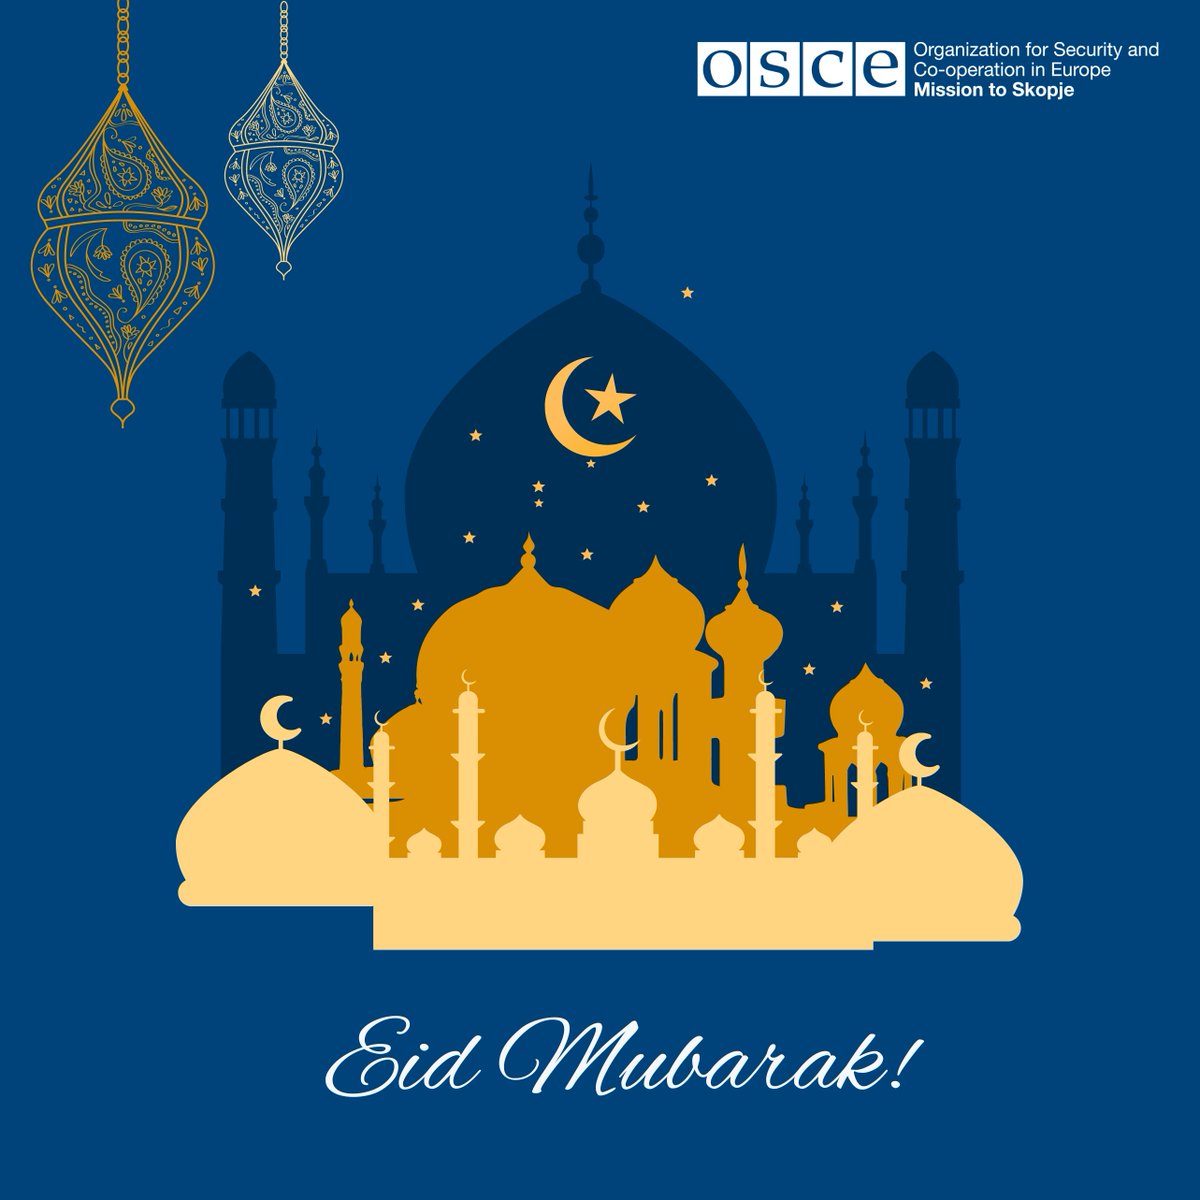 To all the members of the Islamic community in 🇲🇰, we wish you a wonderful #Ramadan Bajram! May you spend it in health, joy, and prosperity with your loved ones.